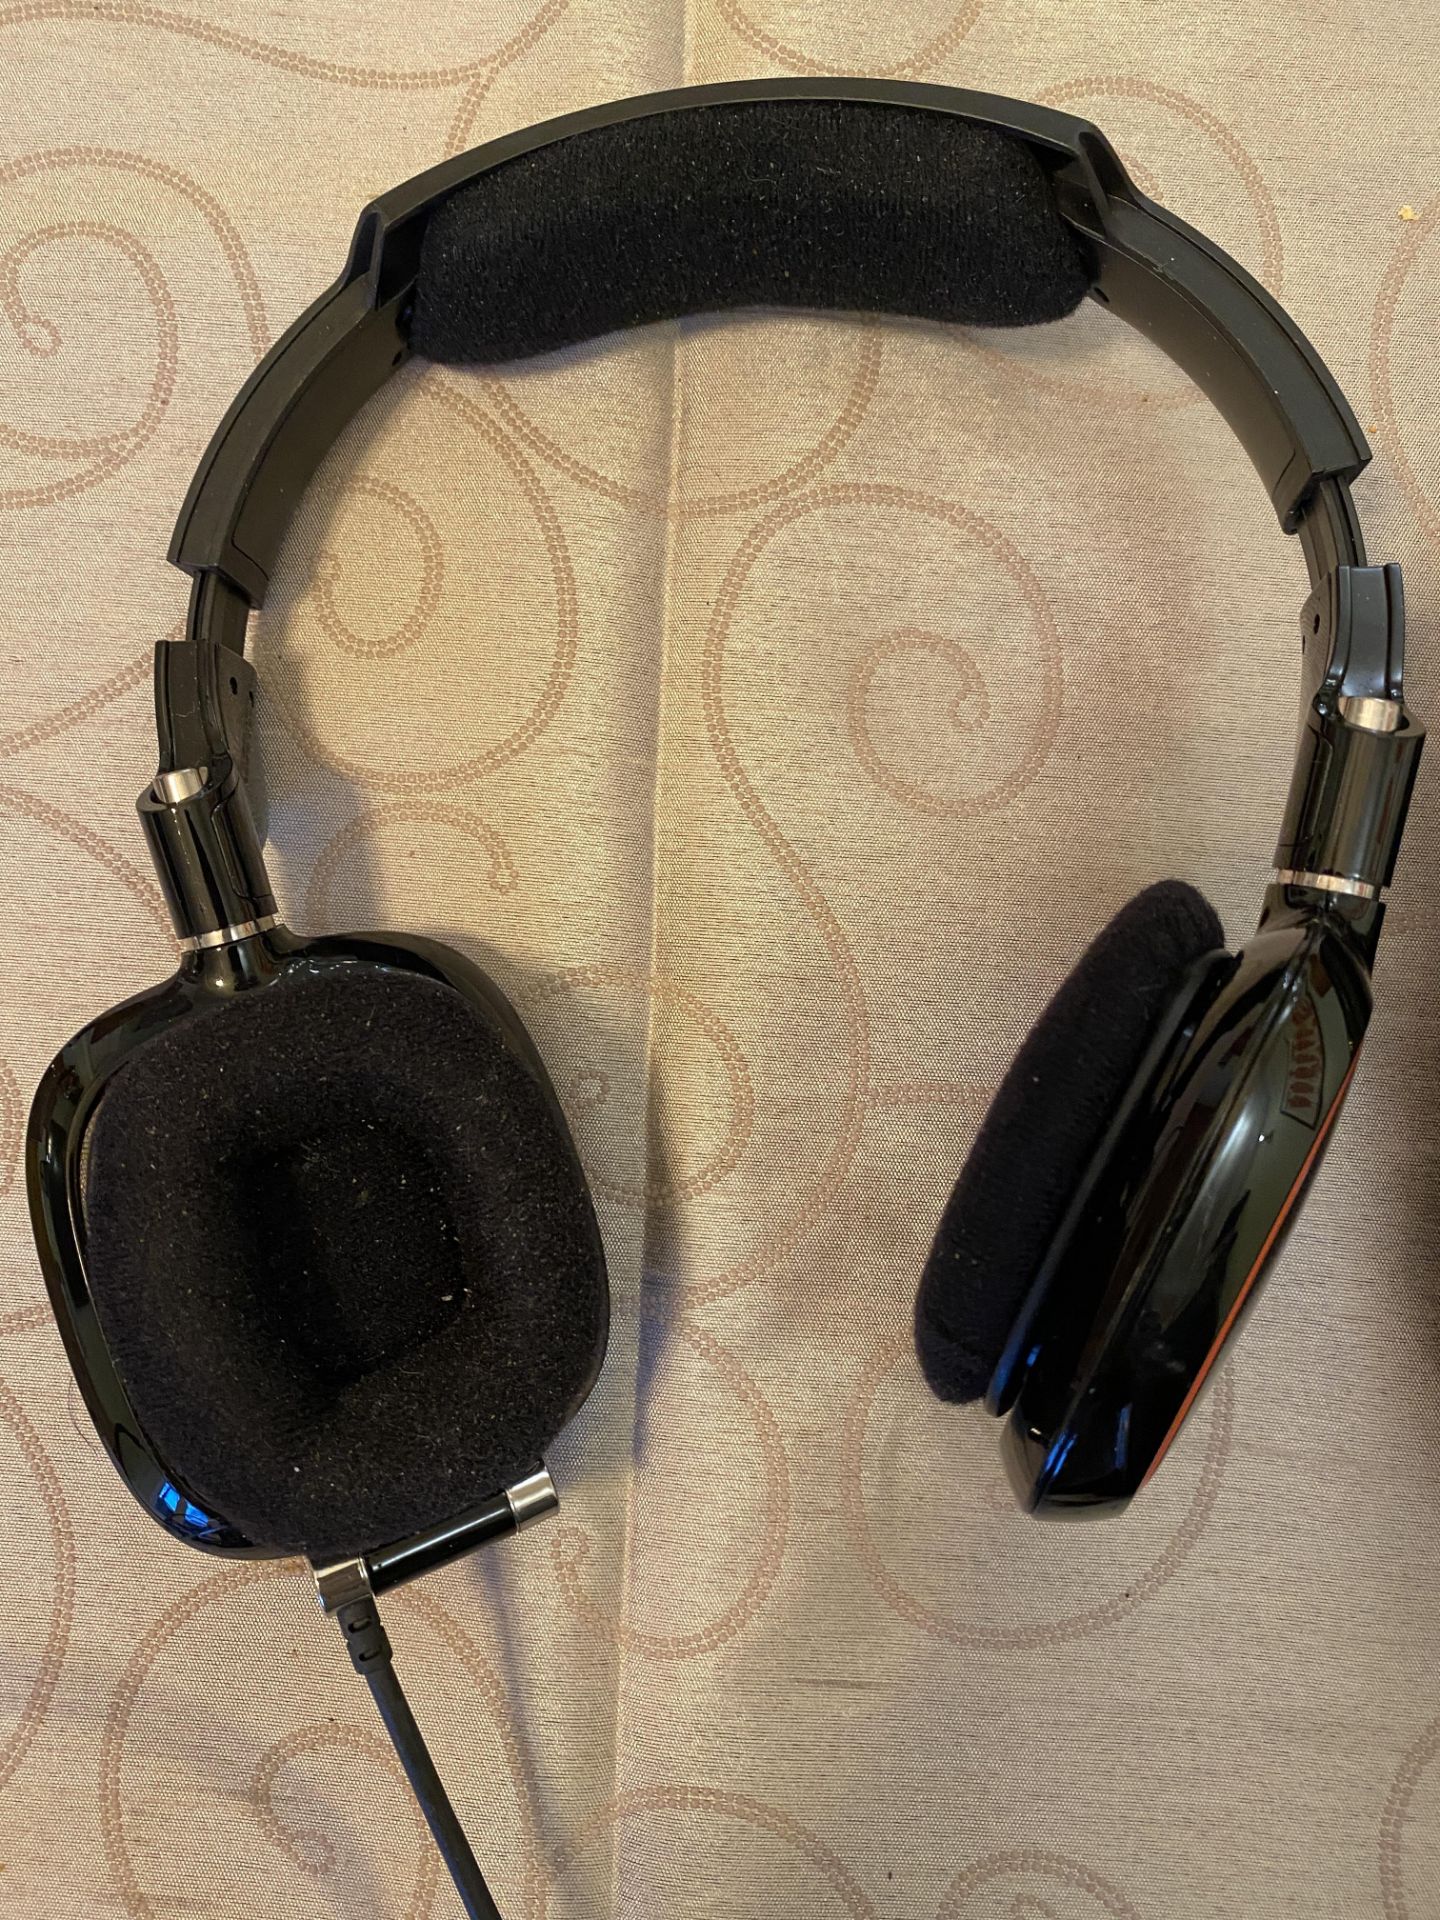 Astro A30 Headset with Carry Case and Extra Leads and Adapters As Shown - Image 2 of 10